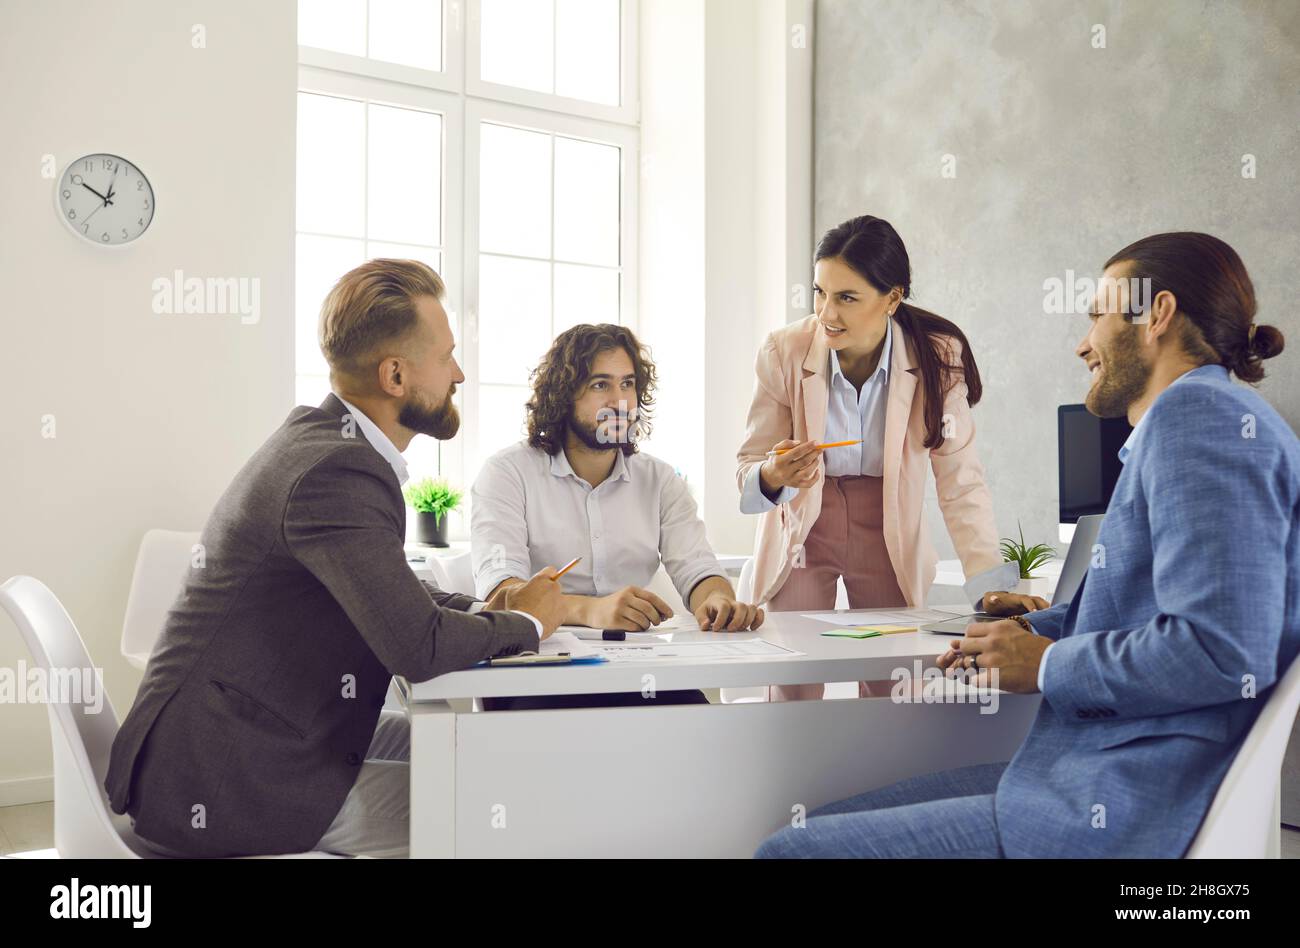 Group of people meeting around office table and working on business project together Stock Photo